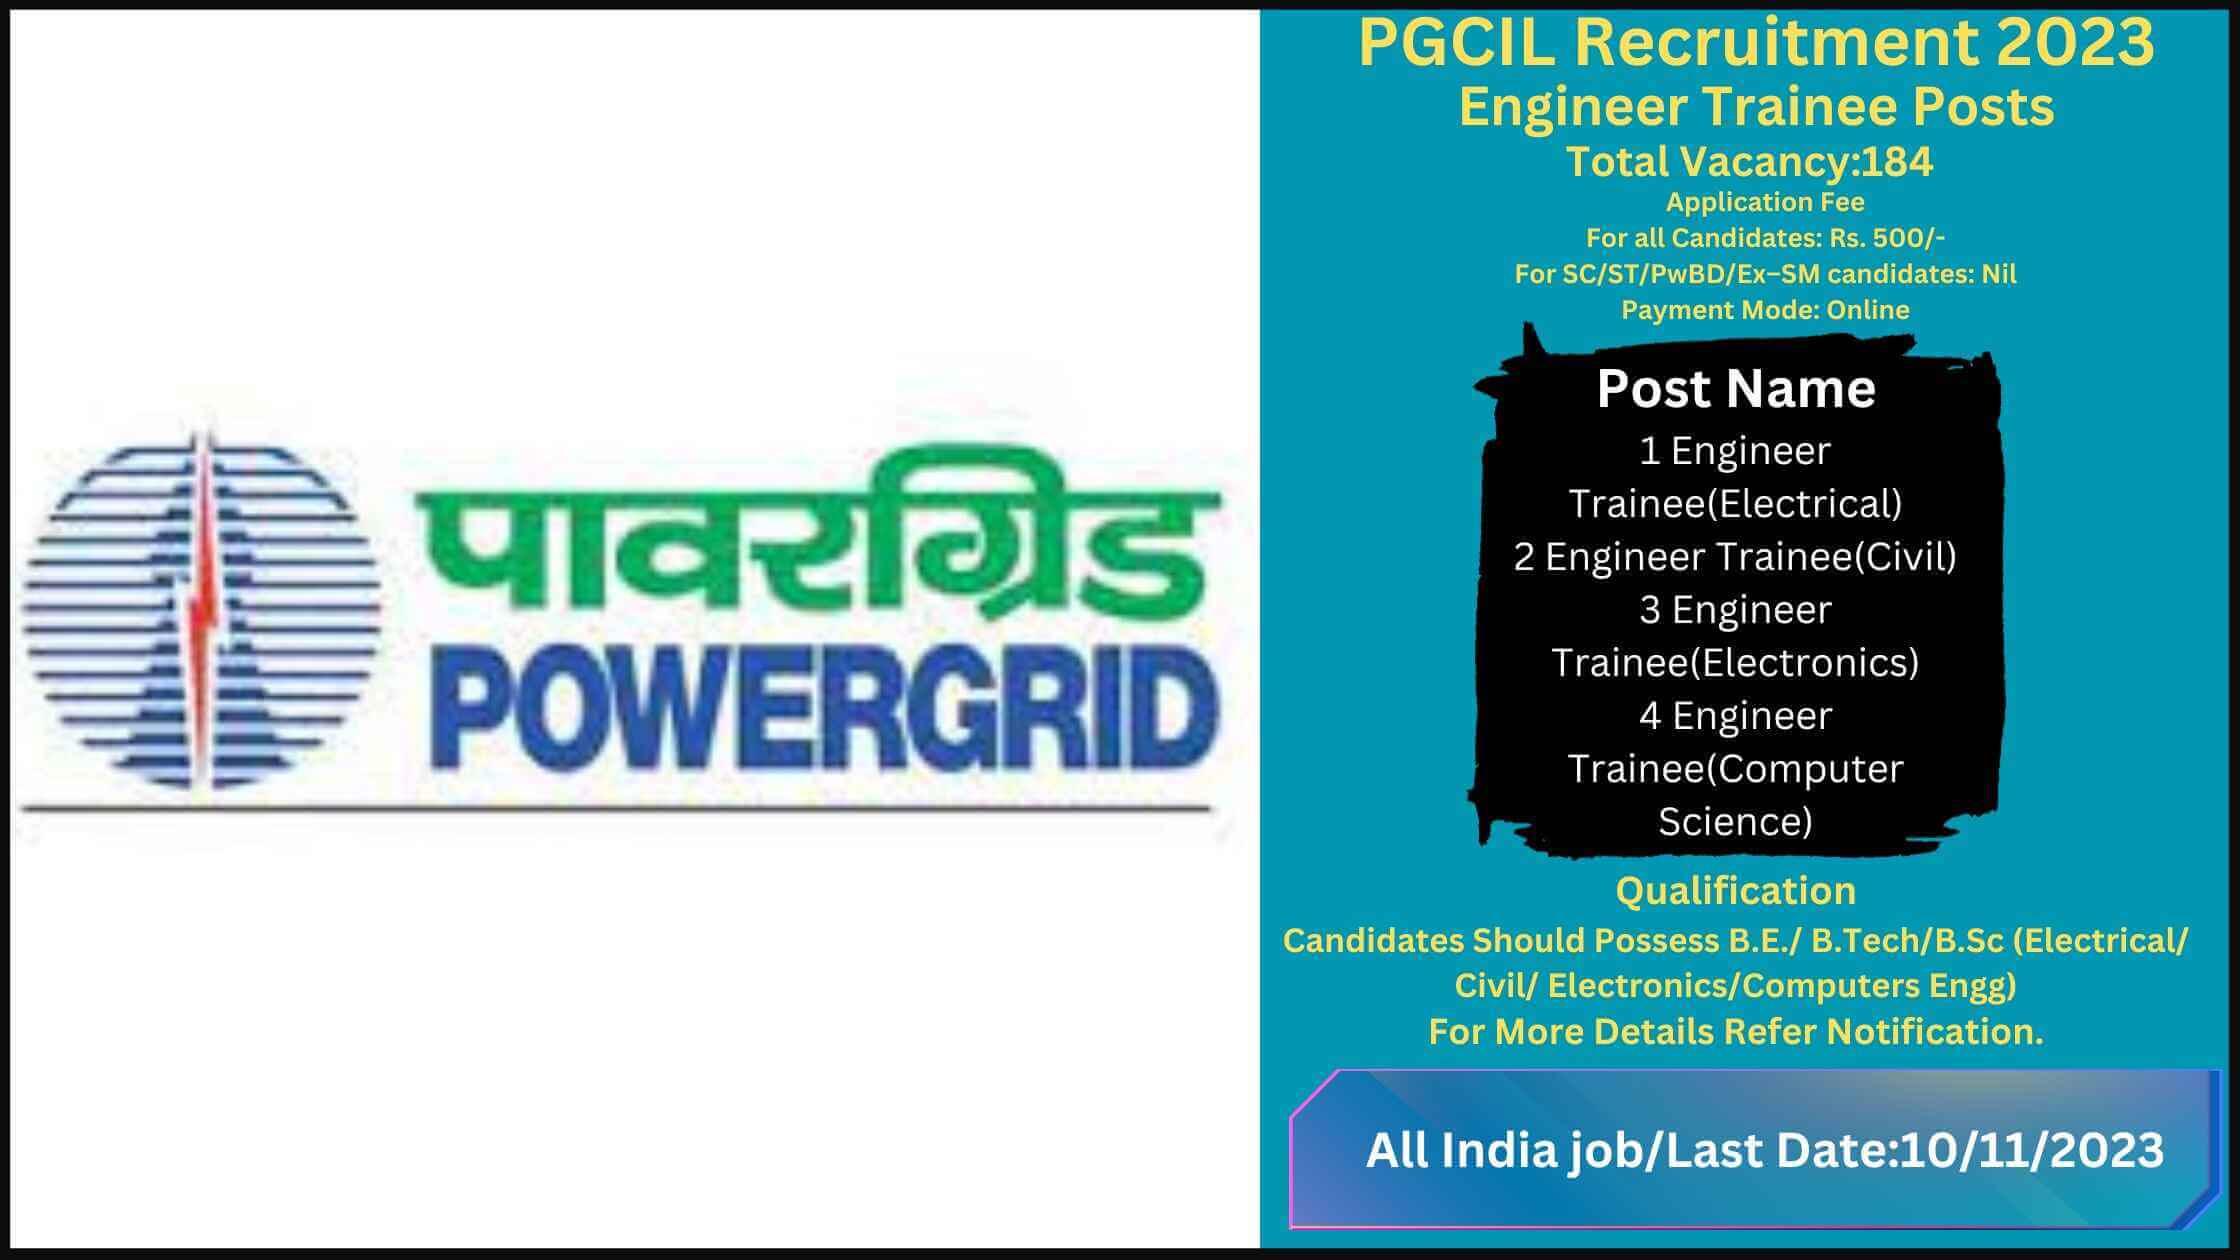 PGCIL Recruitment 2023 – Apply Online for 184 Engineer Trainee Posts